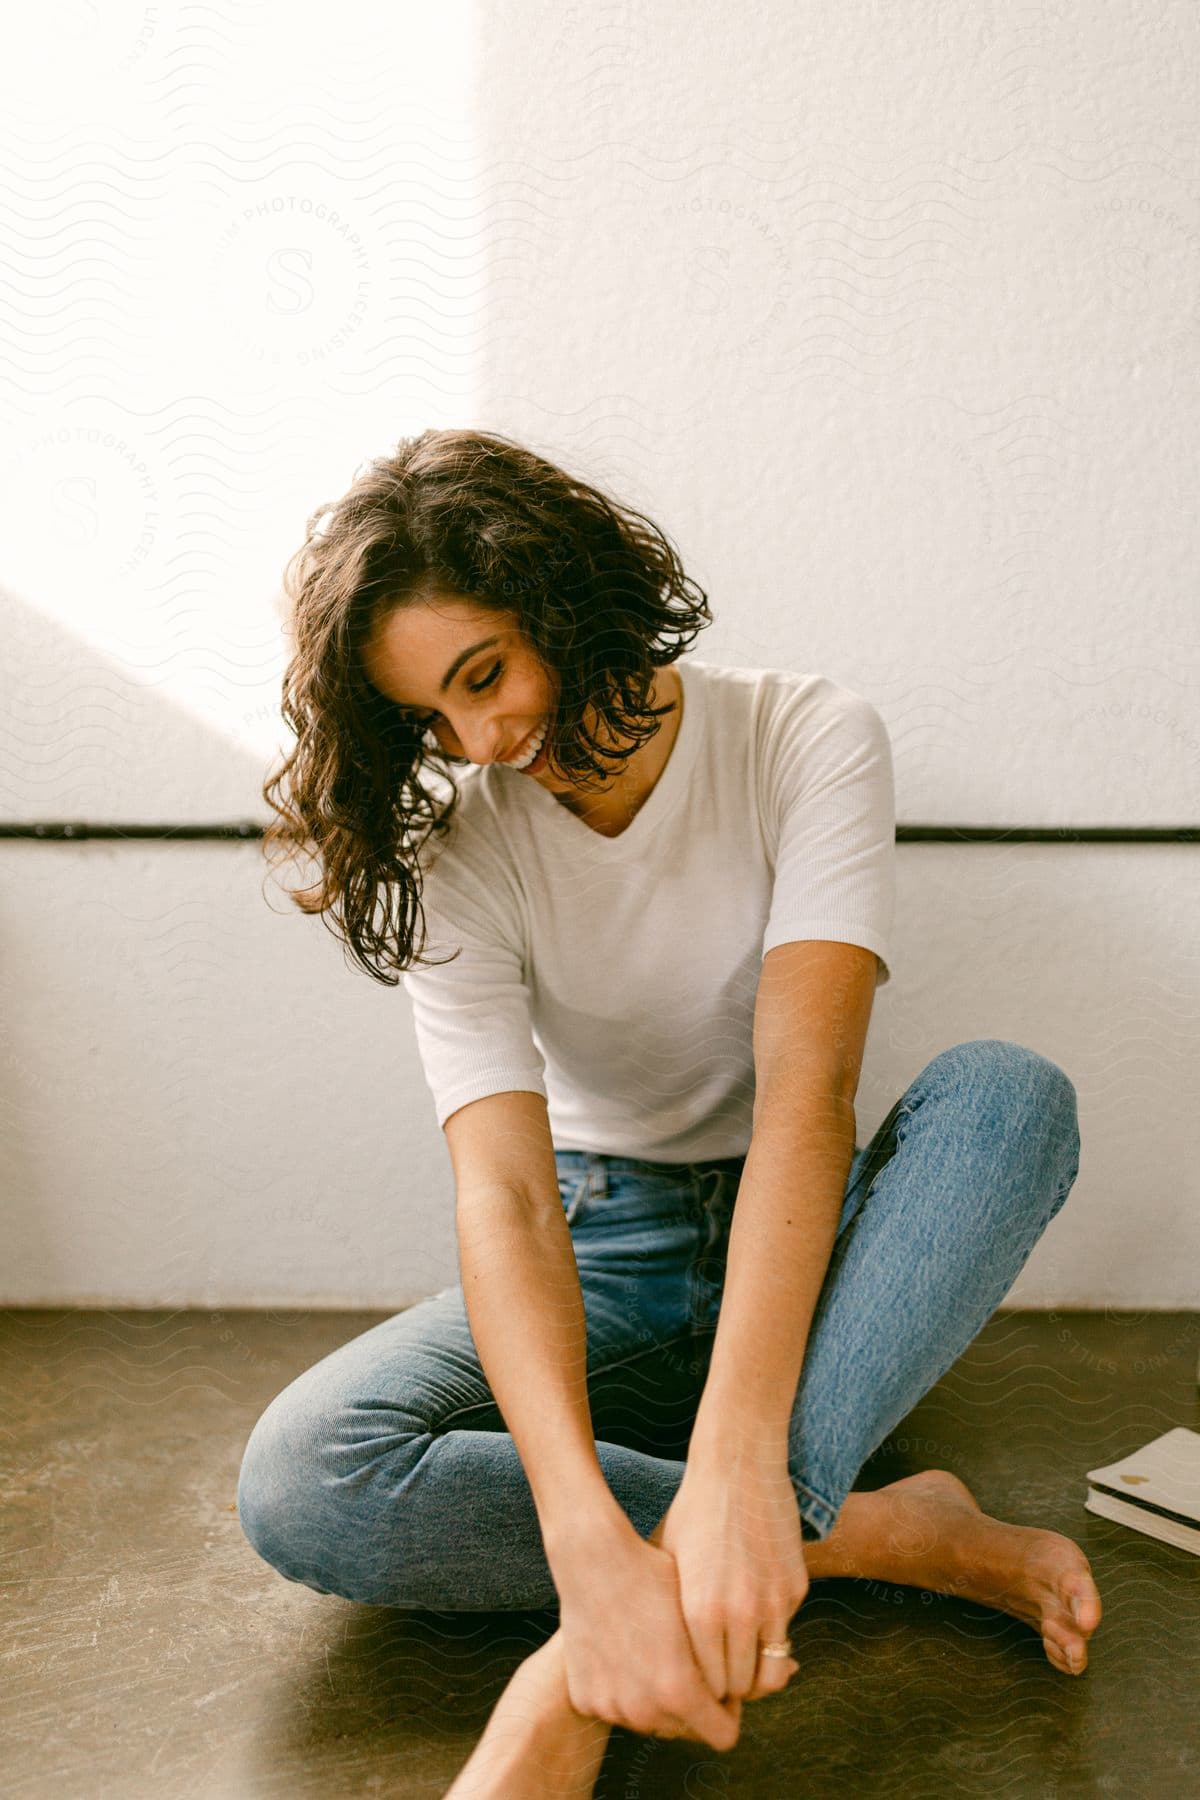 A woman in jeans and white shirt laughs while sitting on the floor.